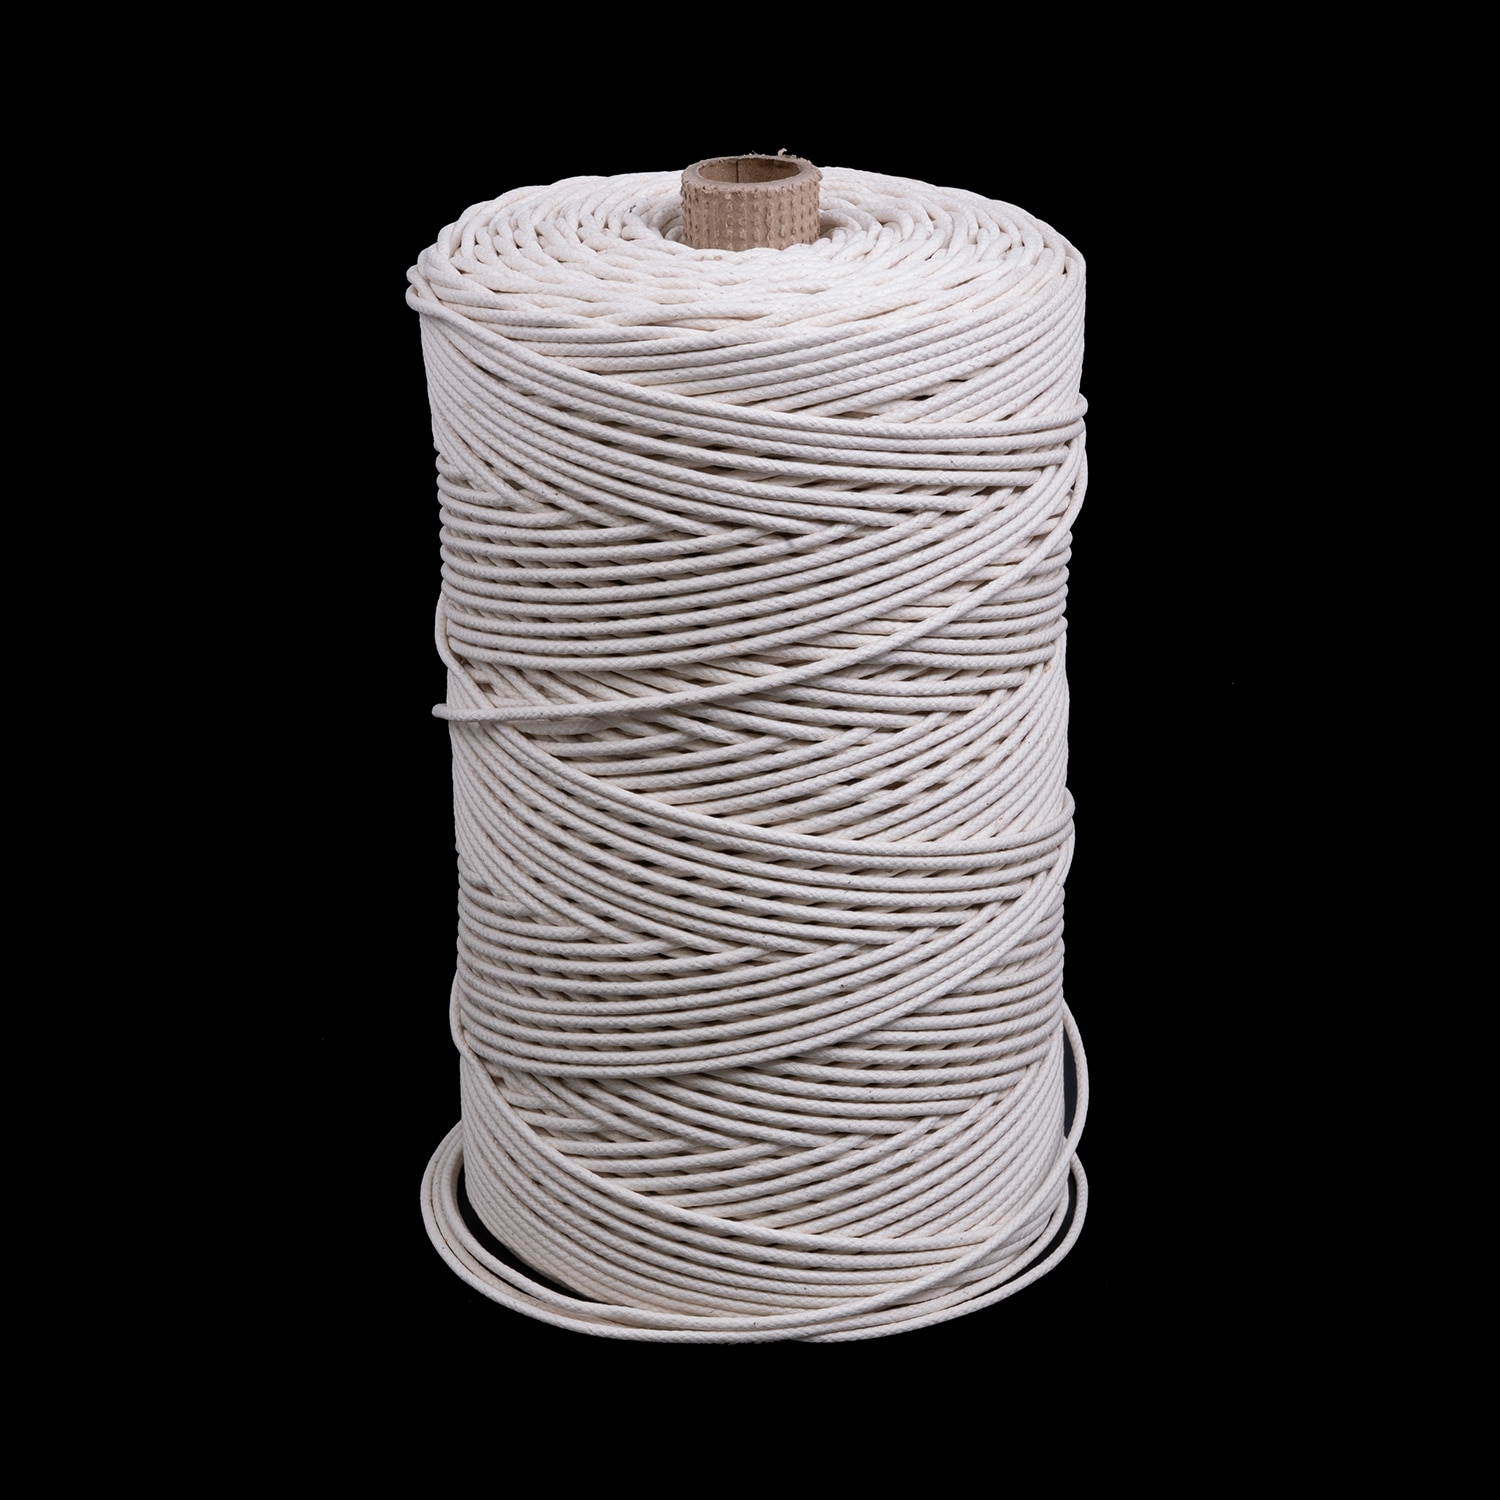 Solid Braided Cotton Ultra Lacing Cord #4 1/8 x 1500' White